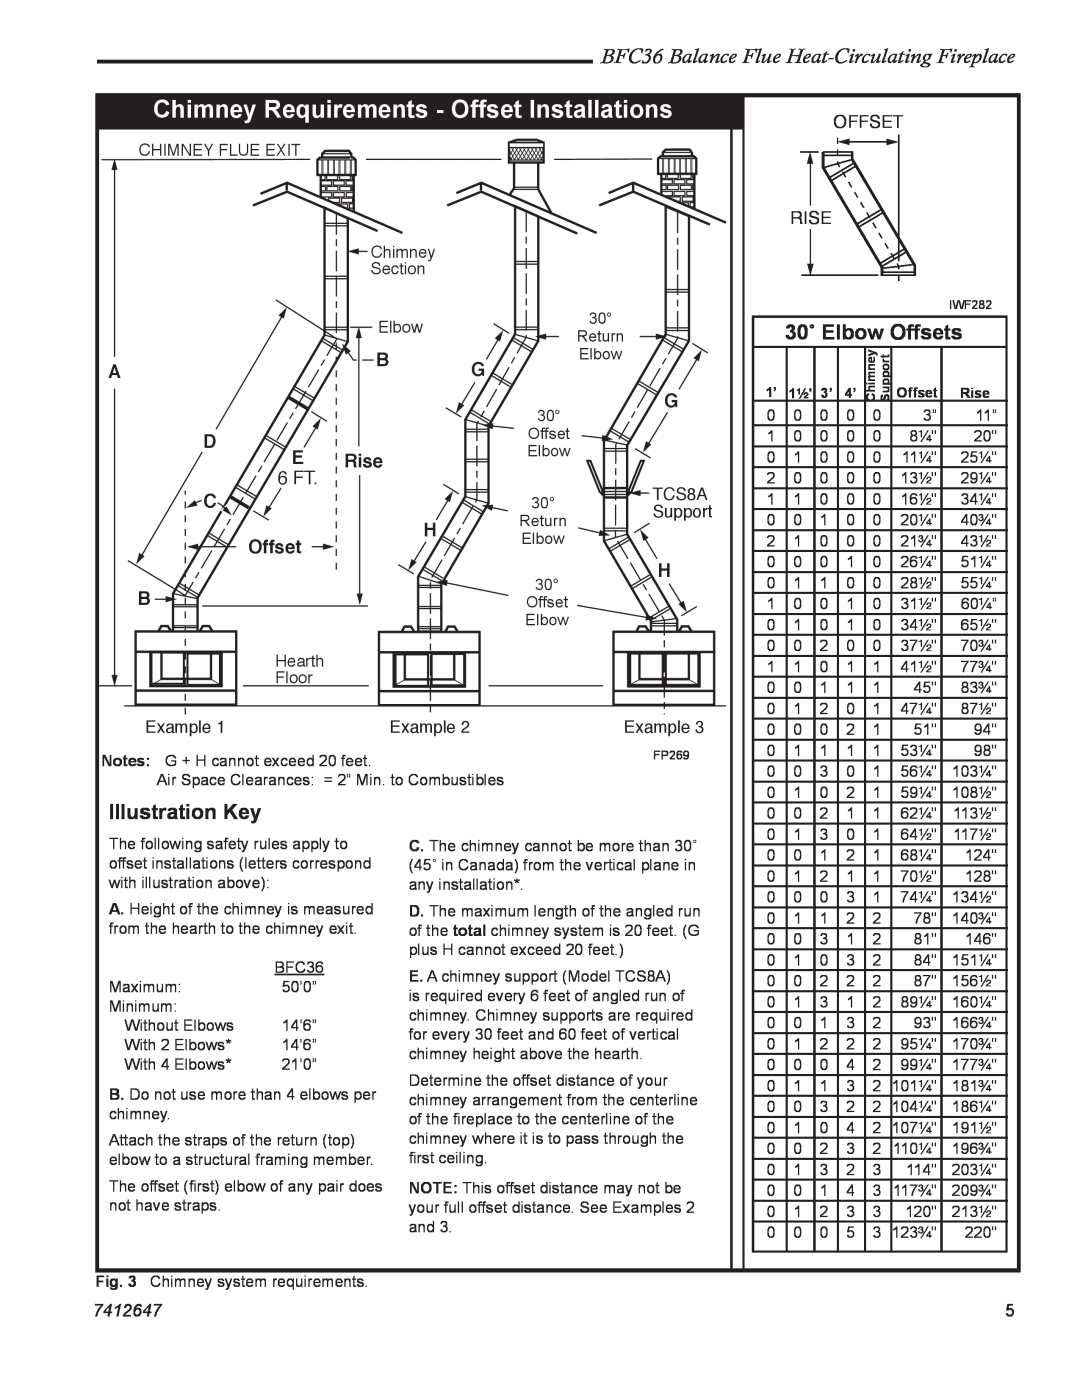 Vermont Casting 647 BFC manual Chimney Requirements - Offset Installations, 30˚ Elbow Offsets, Illustration Key, Rise 